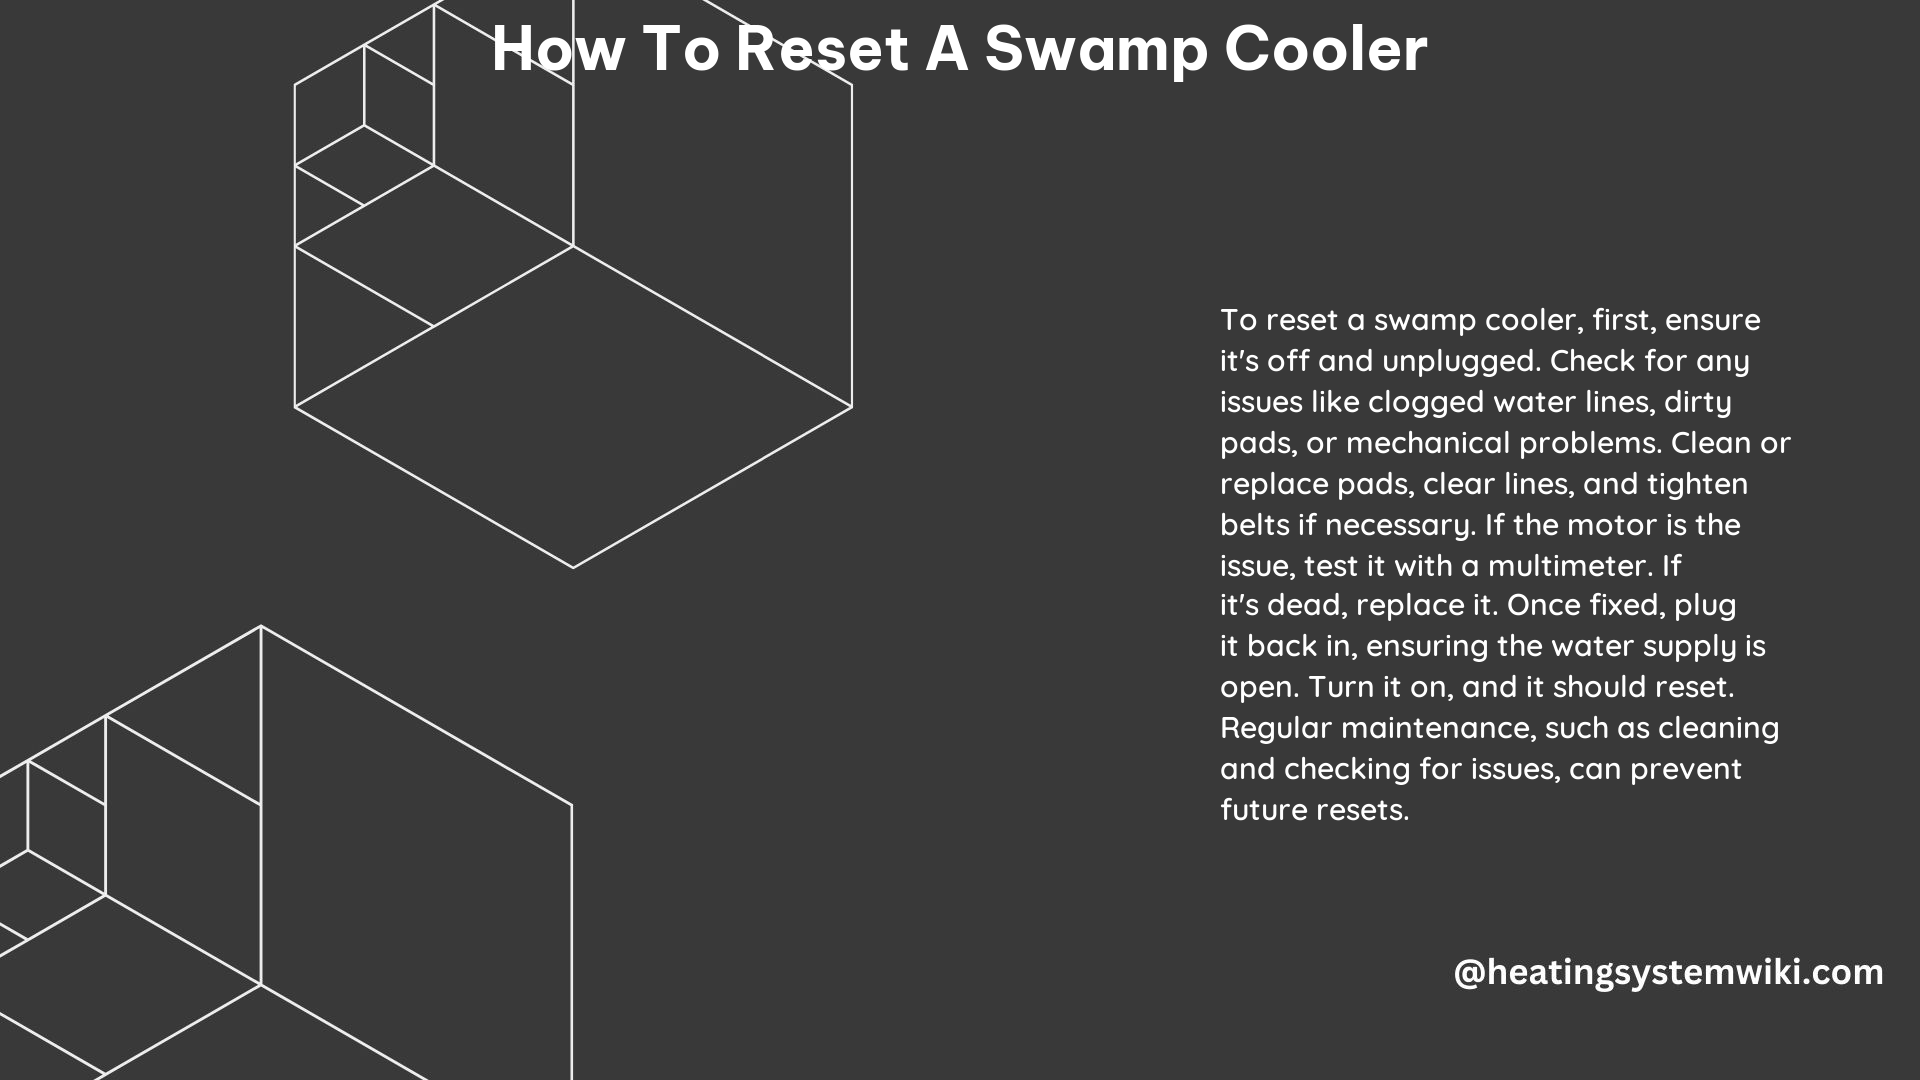 How to Reset a Swamp Cooler